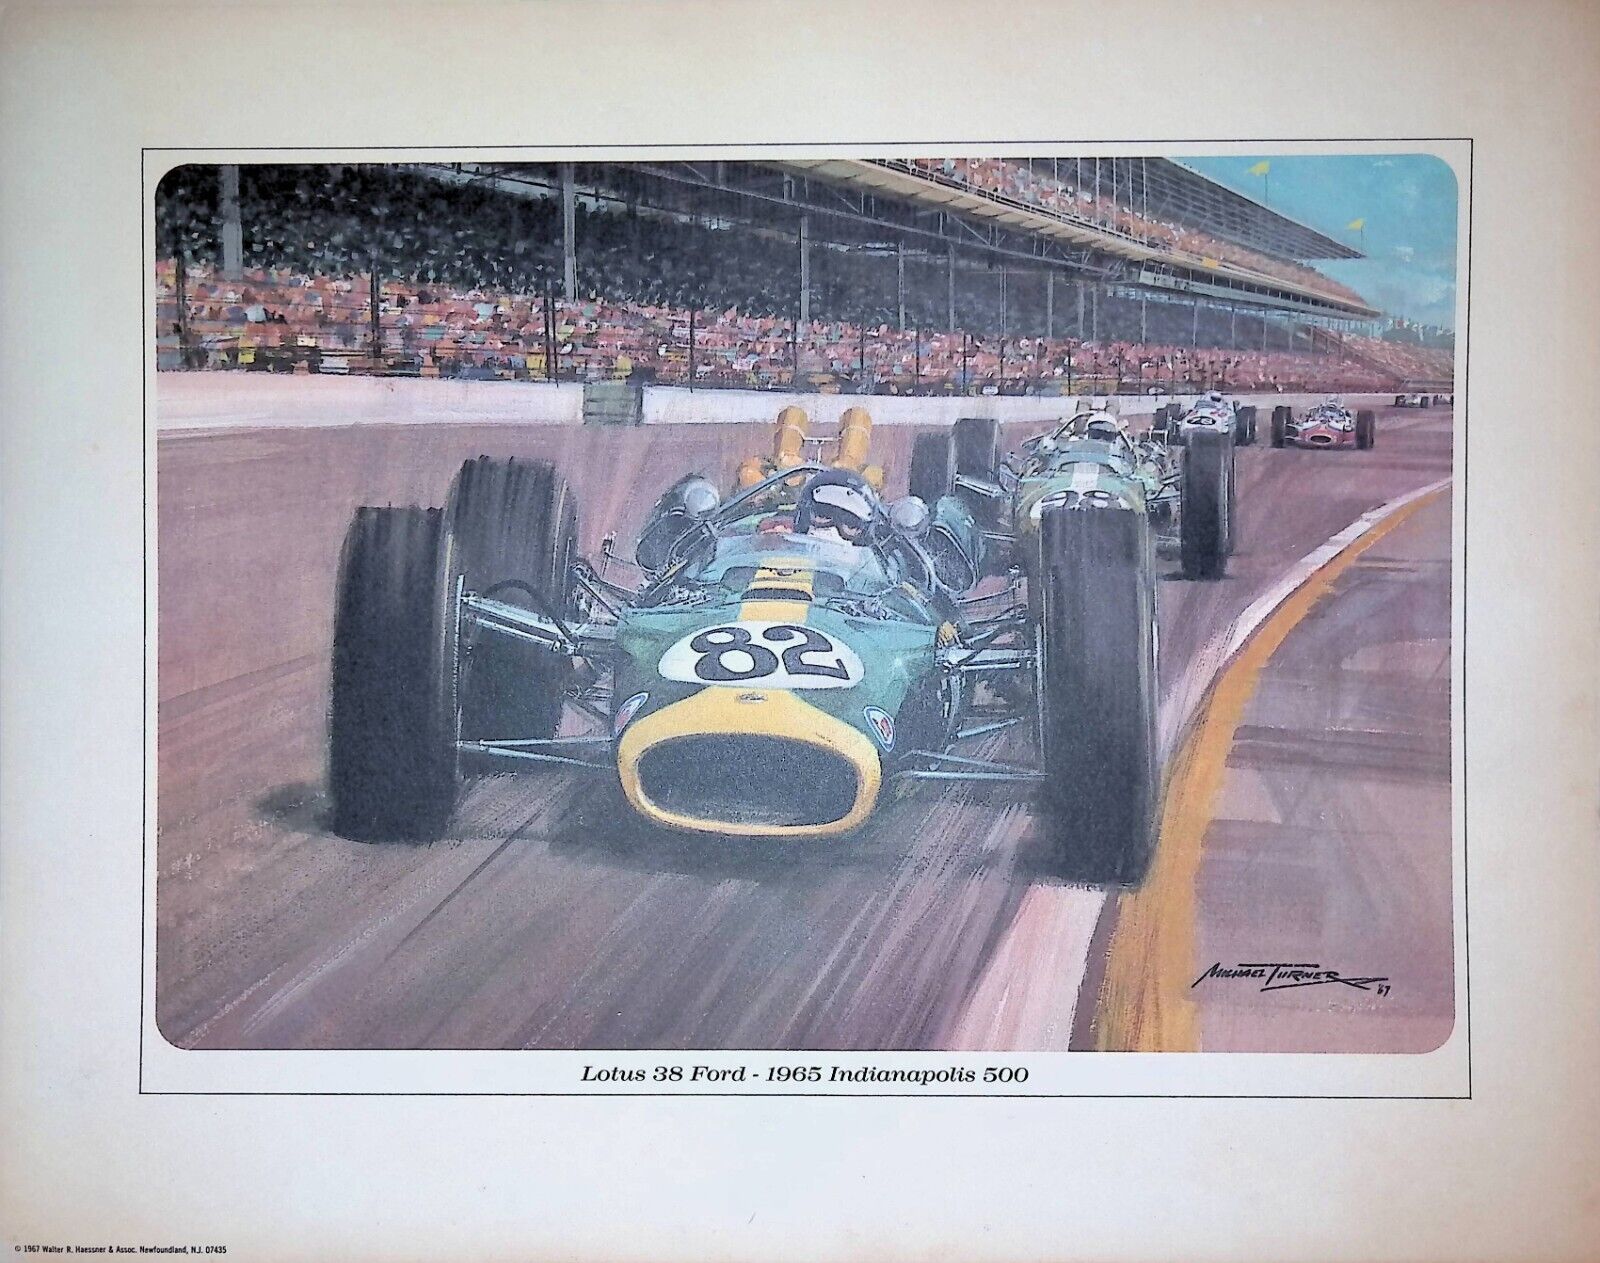 VINTAGE LOTUS 38 FORD - 1965 INDIANAPOLIS 500 POSTER